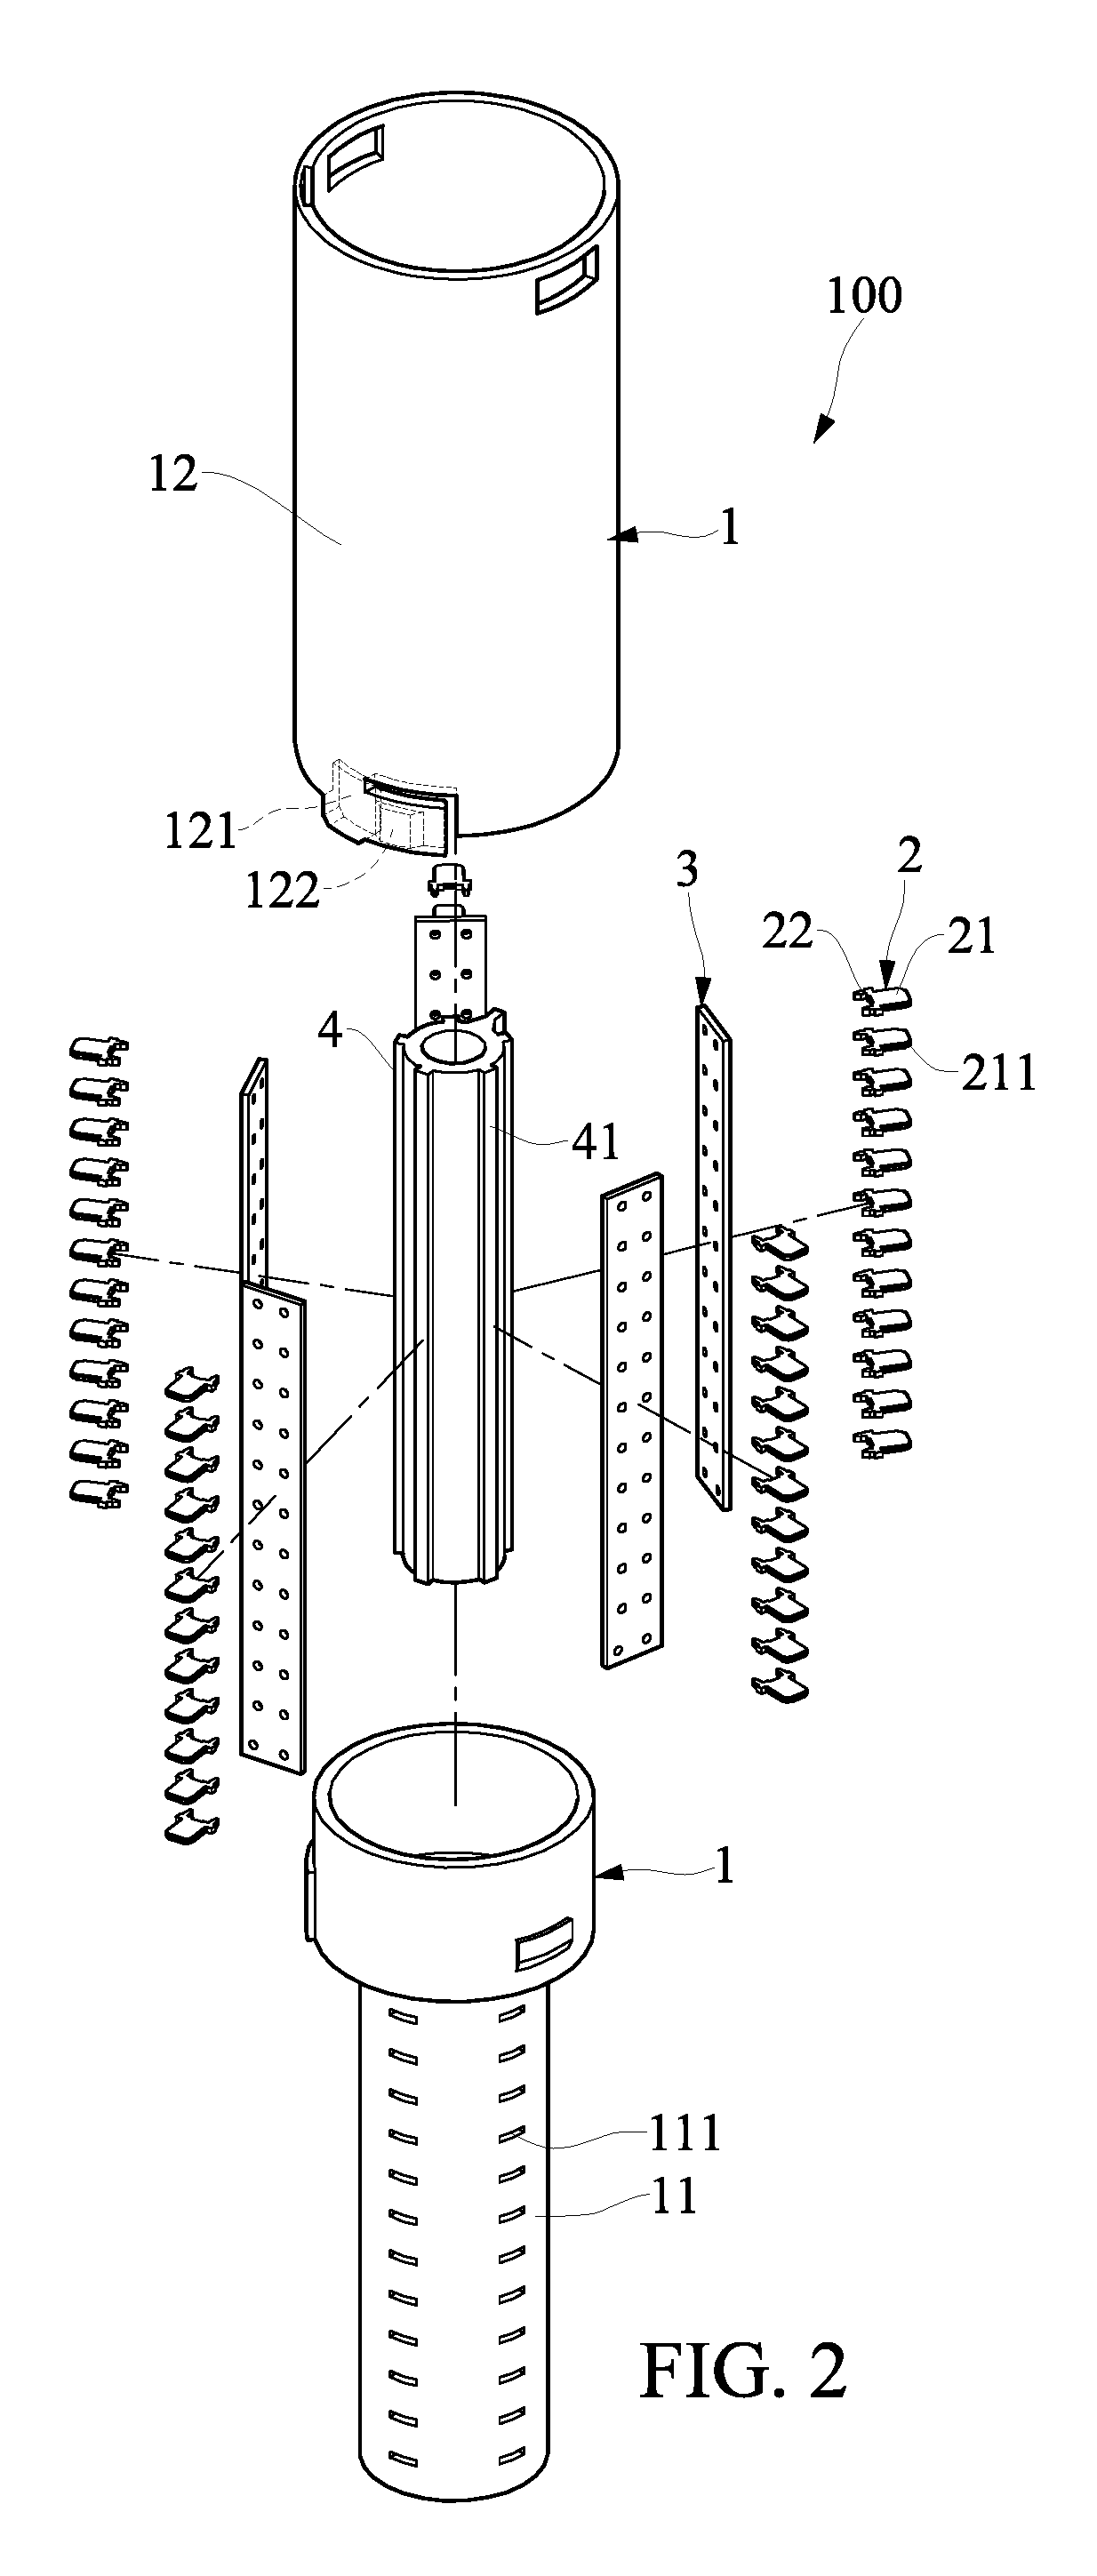 Connecting device with high-density contacts